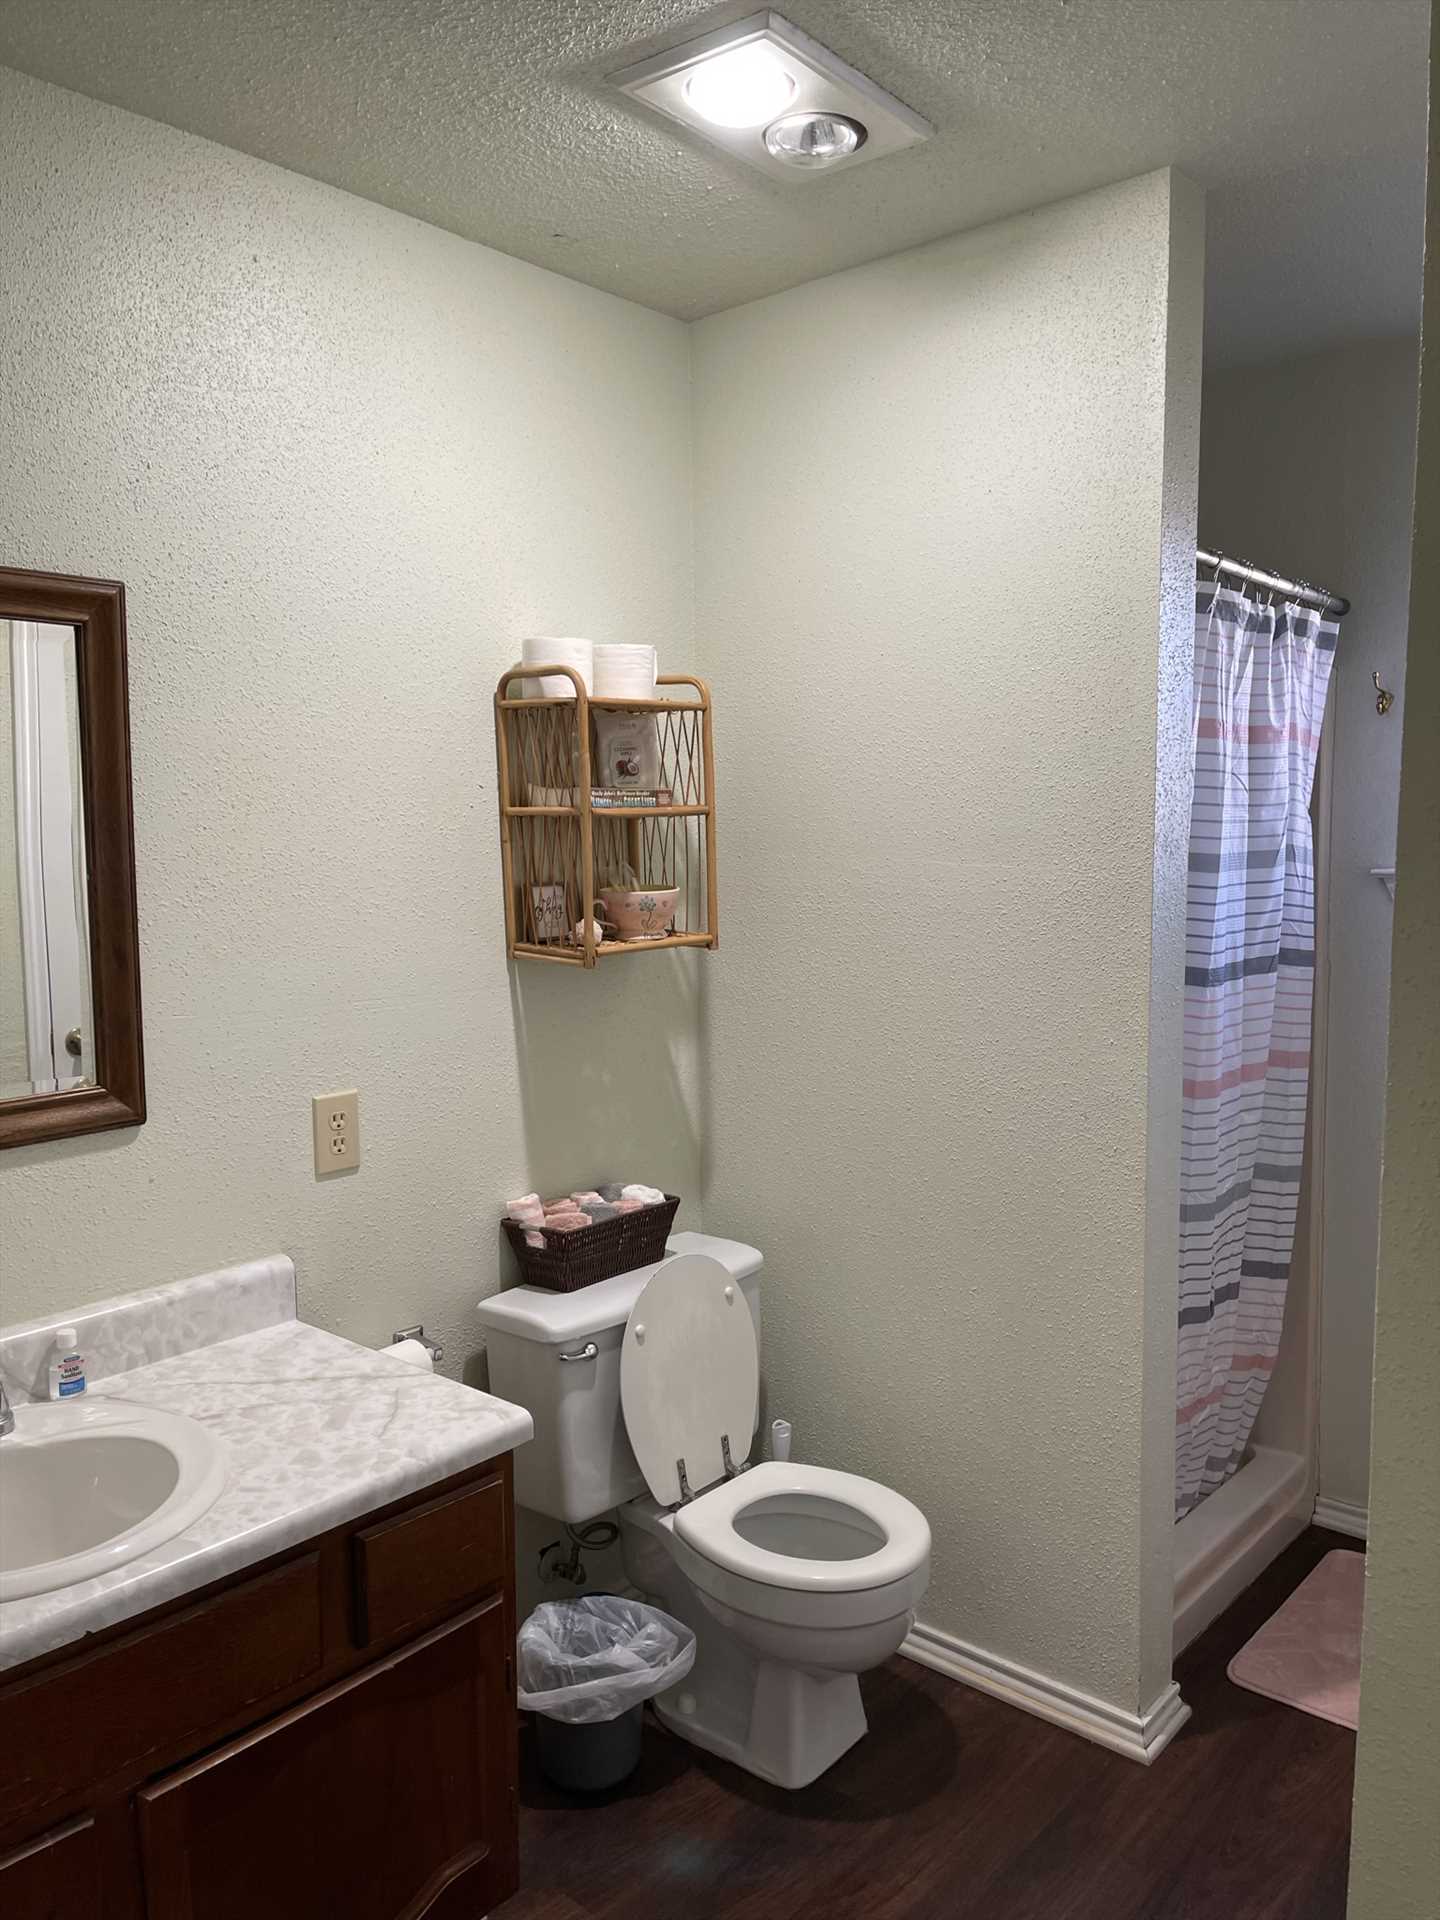                                                 The full bath is sparking clean, and features a large vanity and shower for cleaning up! Bath linens are included, too.